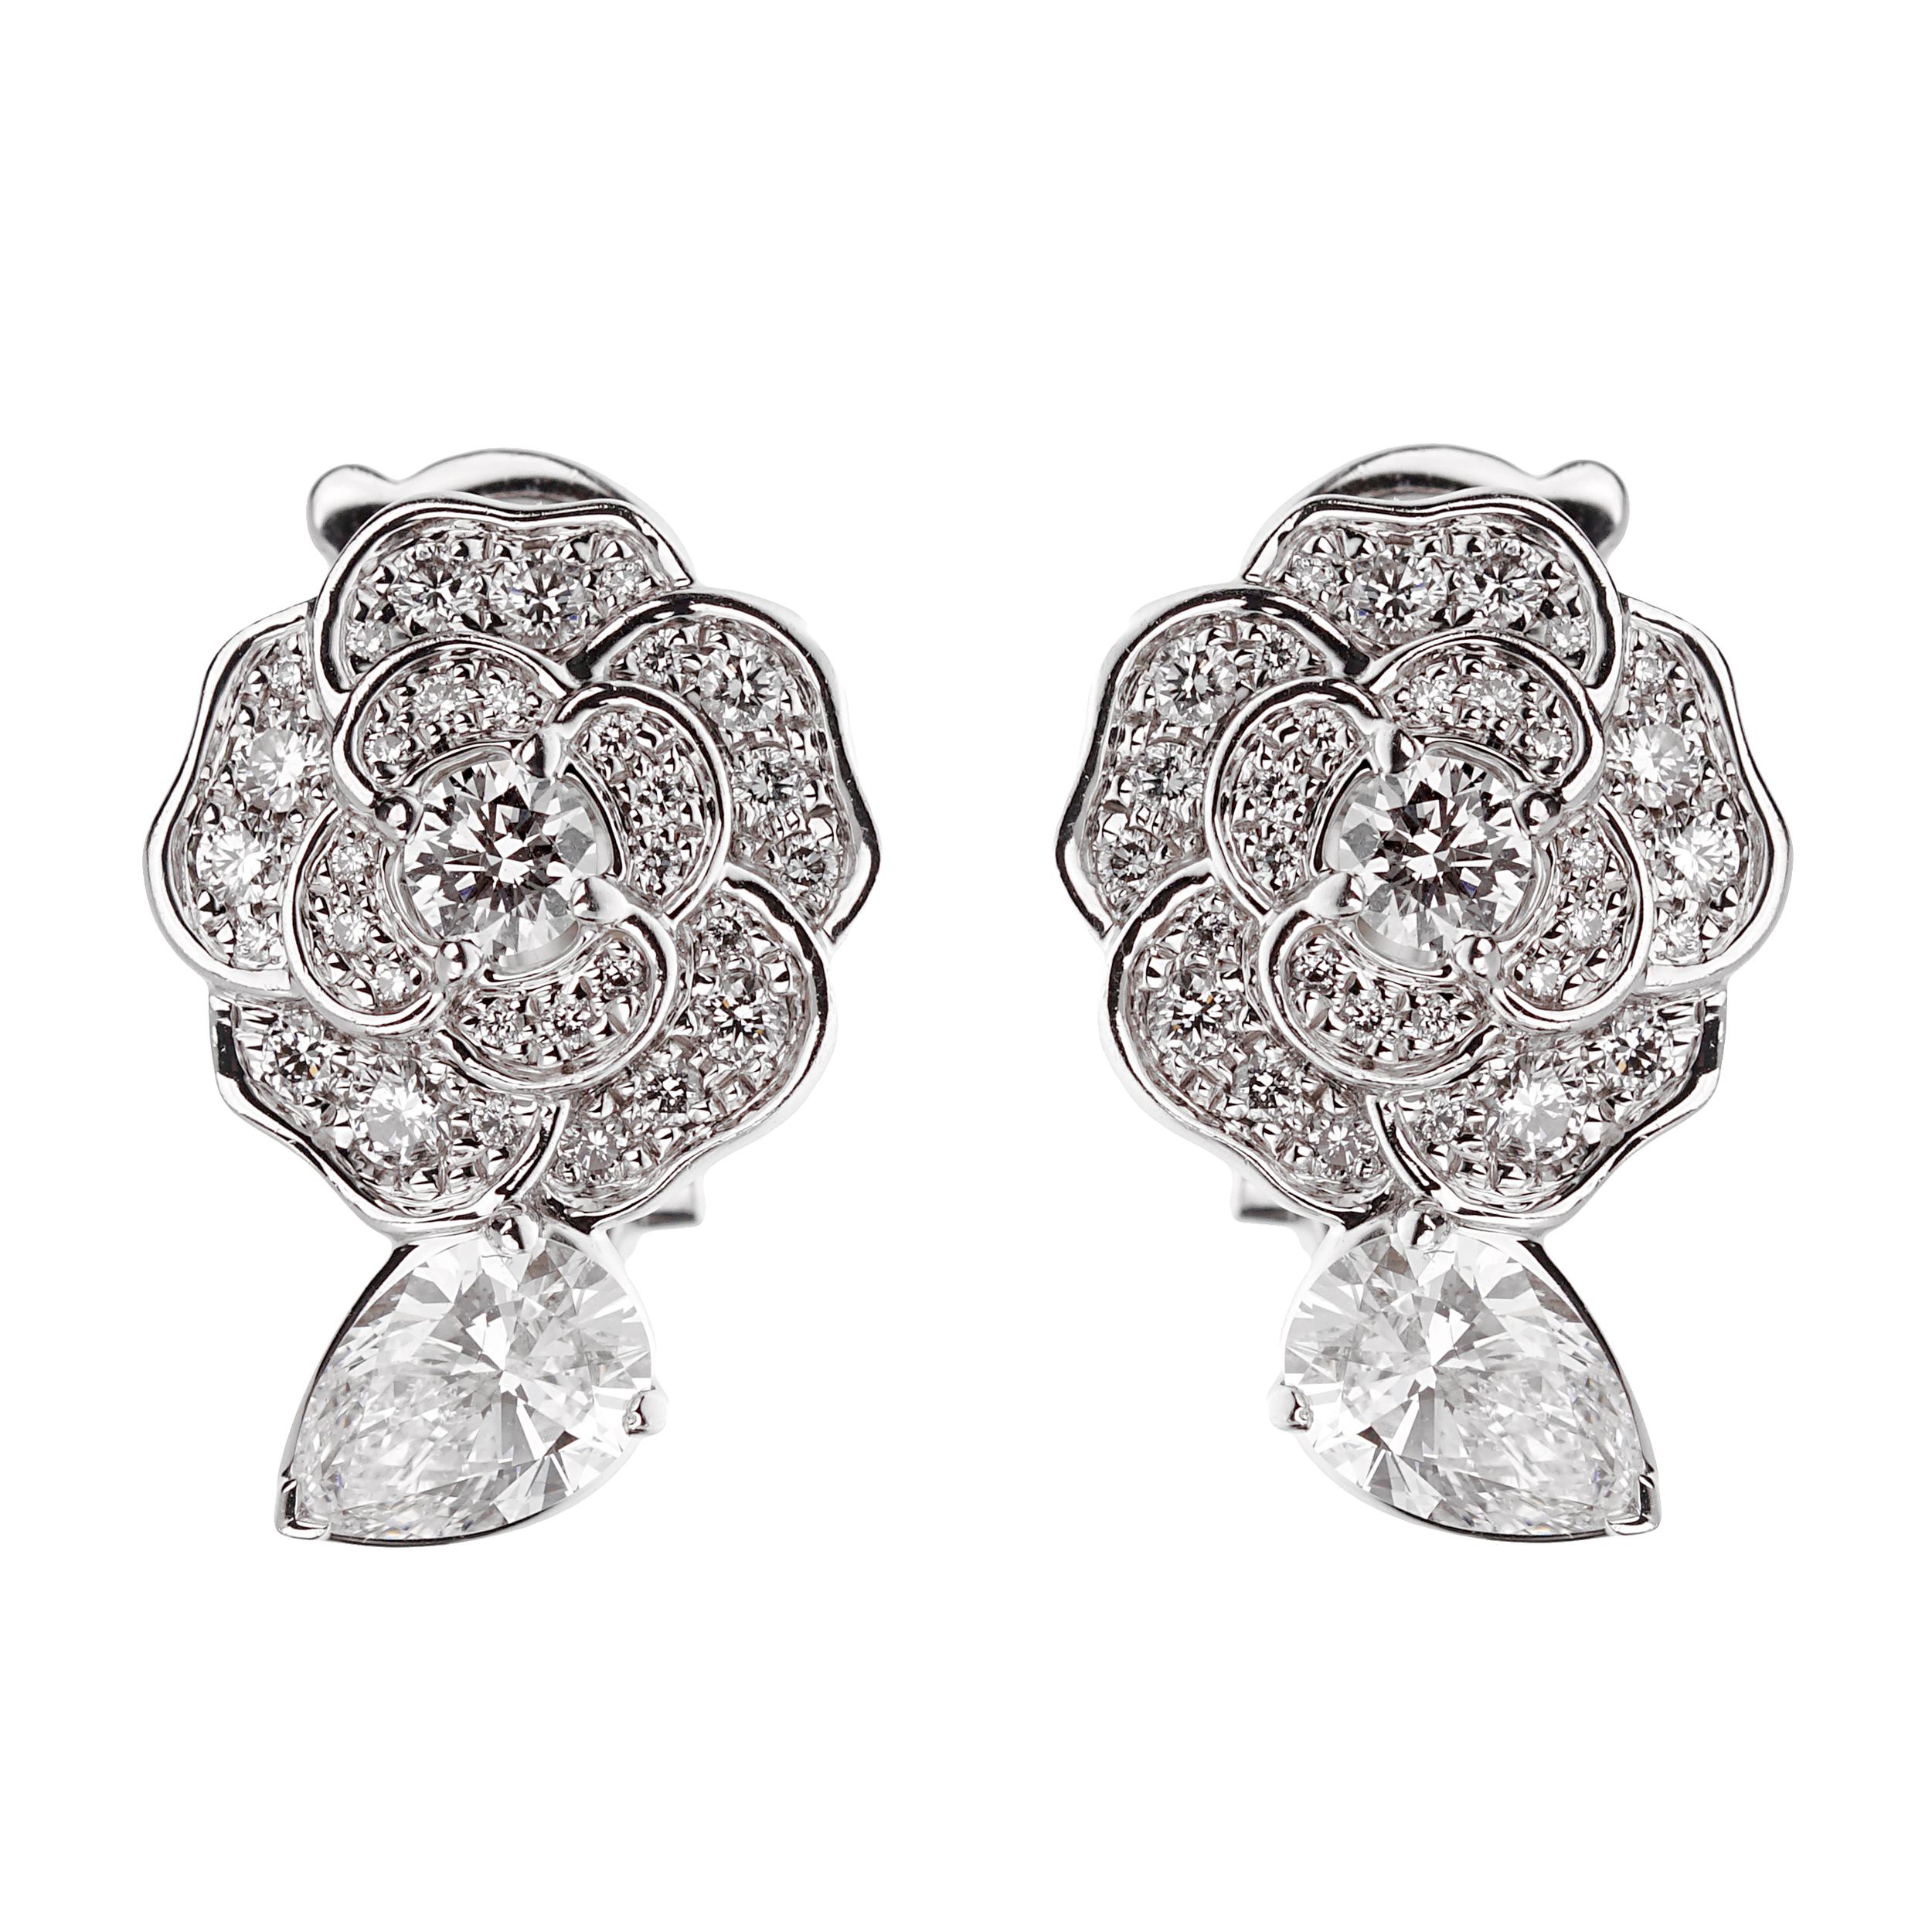 At the heart of these exquisite earrings are two pear-cut diamond center stones, each weighing 0.40 carats. Pear-cut diamonds, known for their unique combination of a round and marquise shape with a tapered point on one end, are celebrated for their